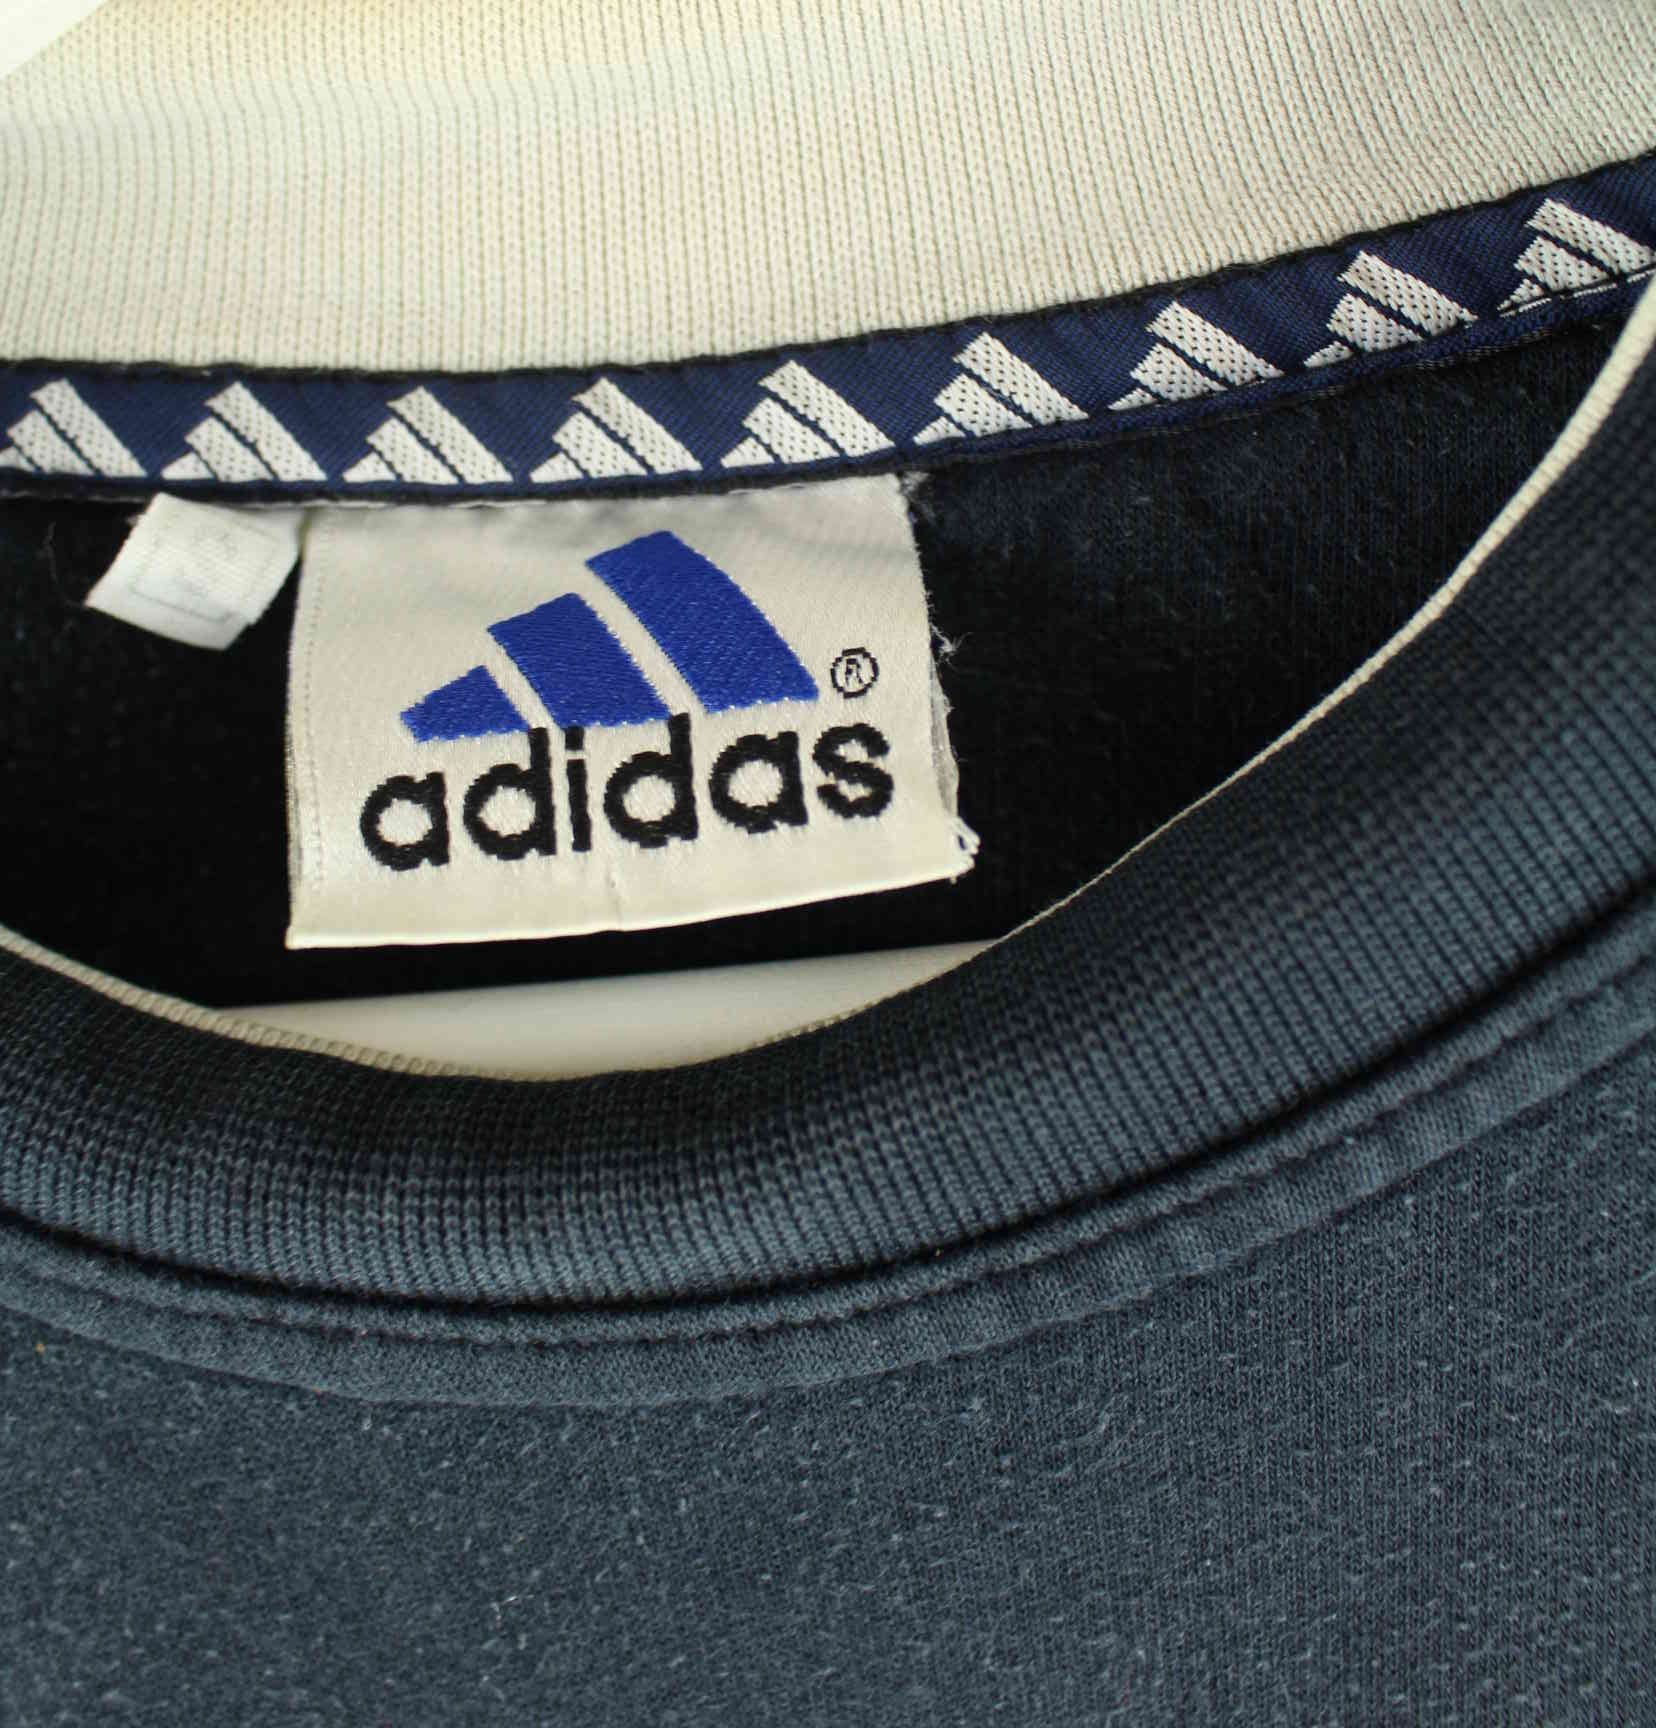 Adidas Equipment 90s Vintage Embroidered Sweater Blau S (detail image 2)